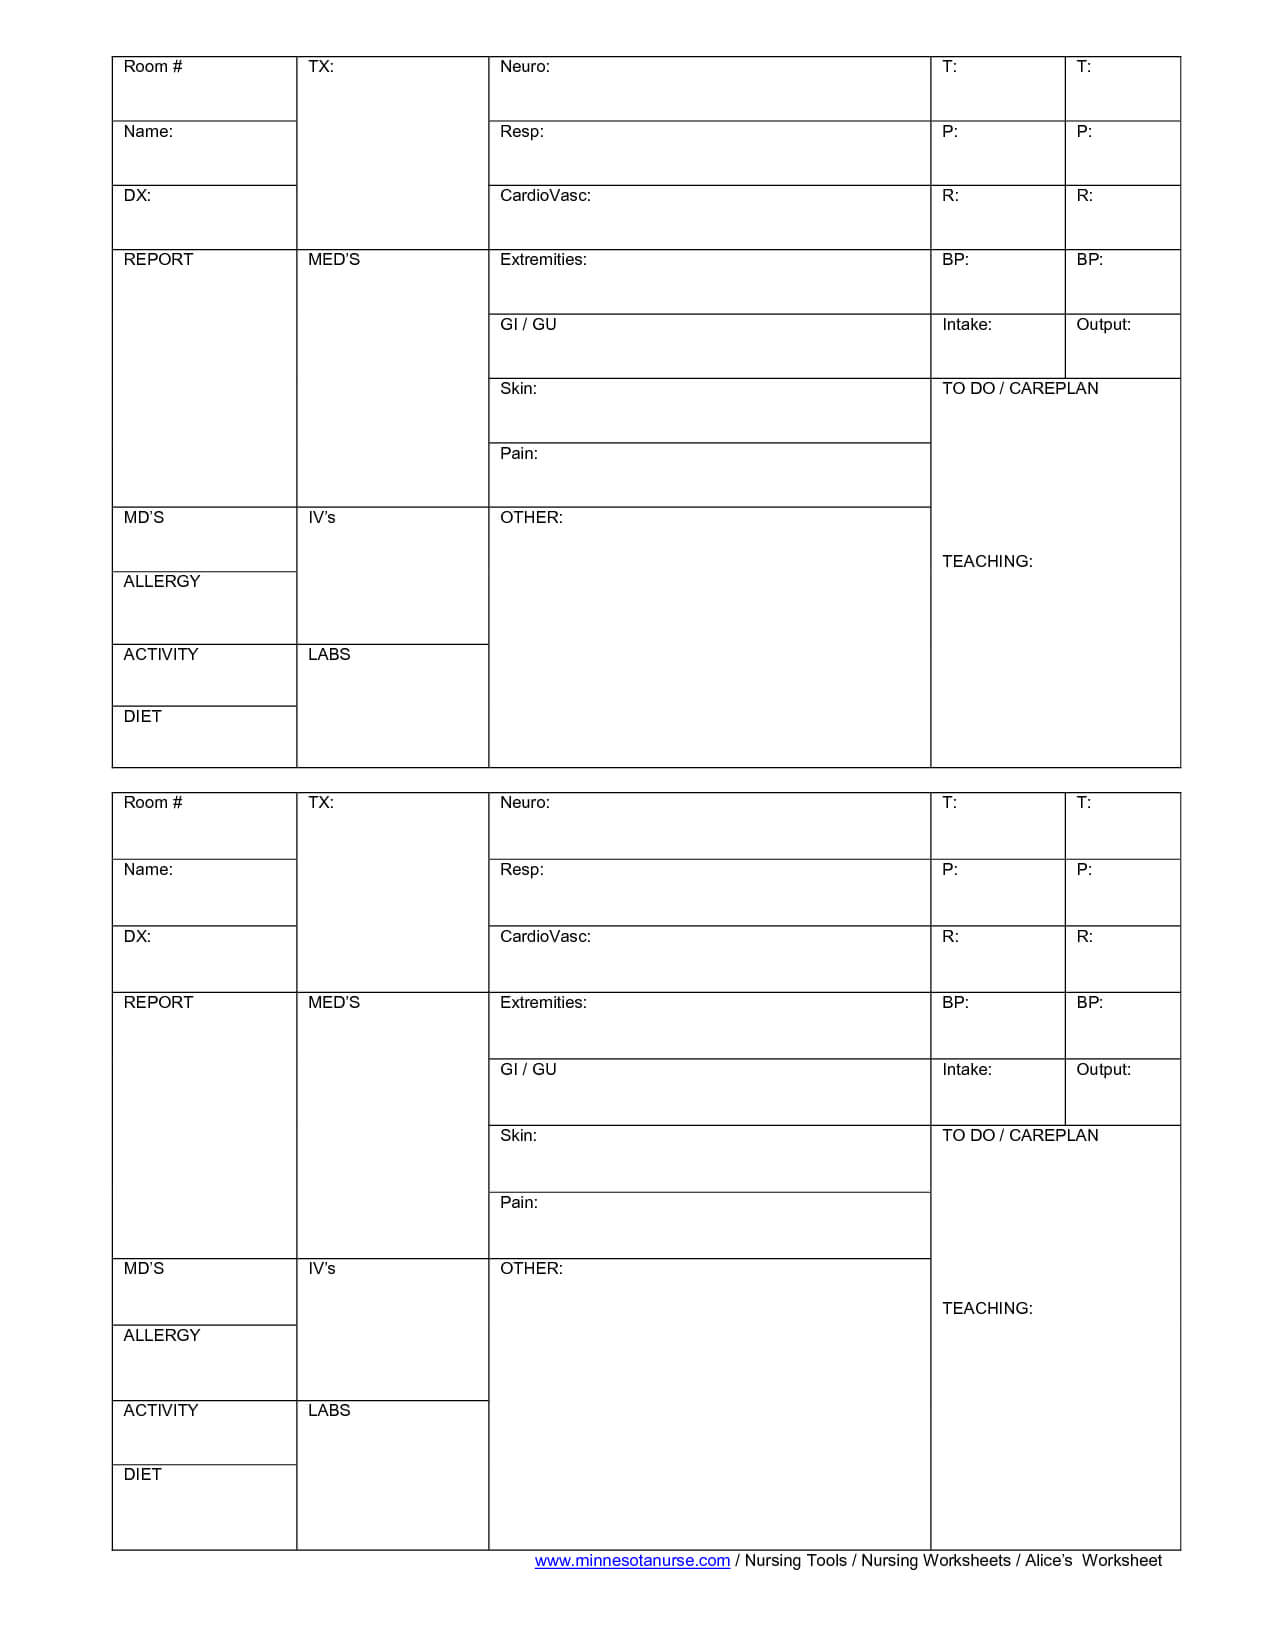 Blank Nursing Report Sheets For Newborns | Nursing Patient Within Charge Nurse Report Sheet Template